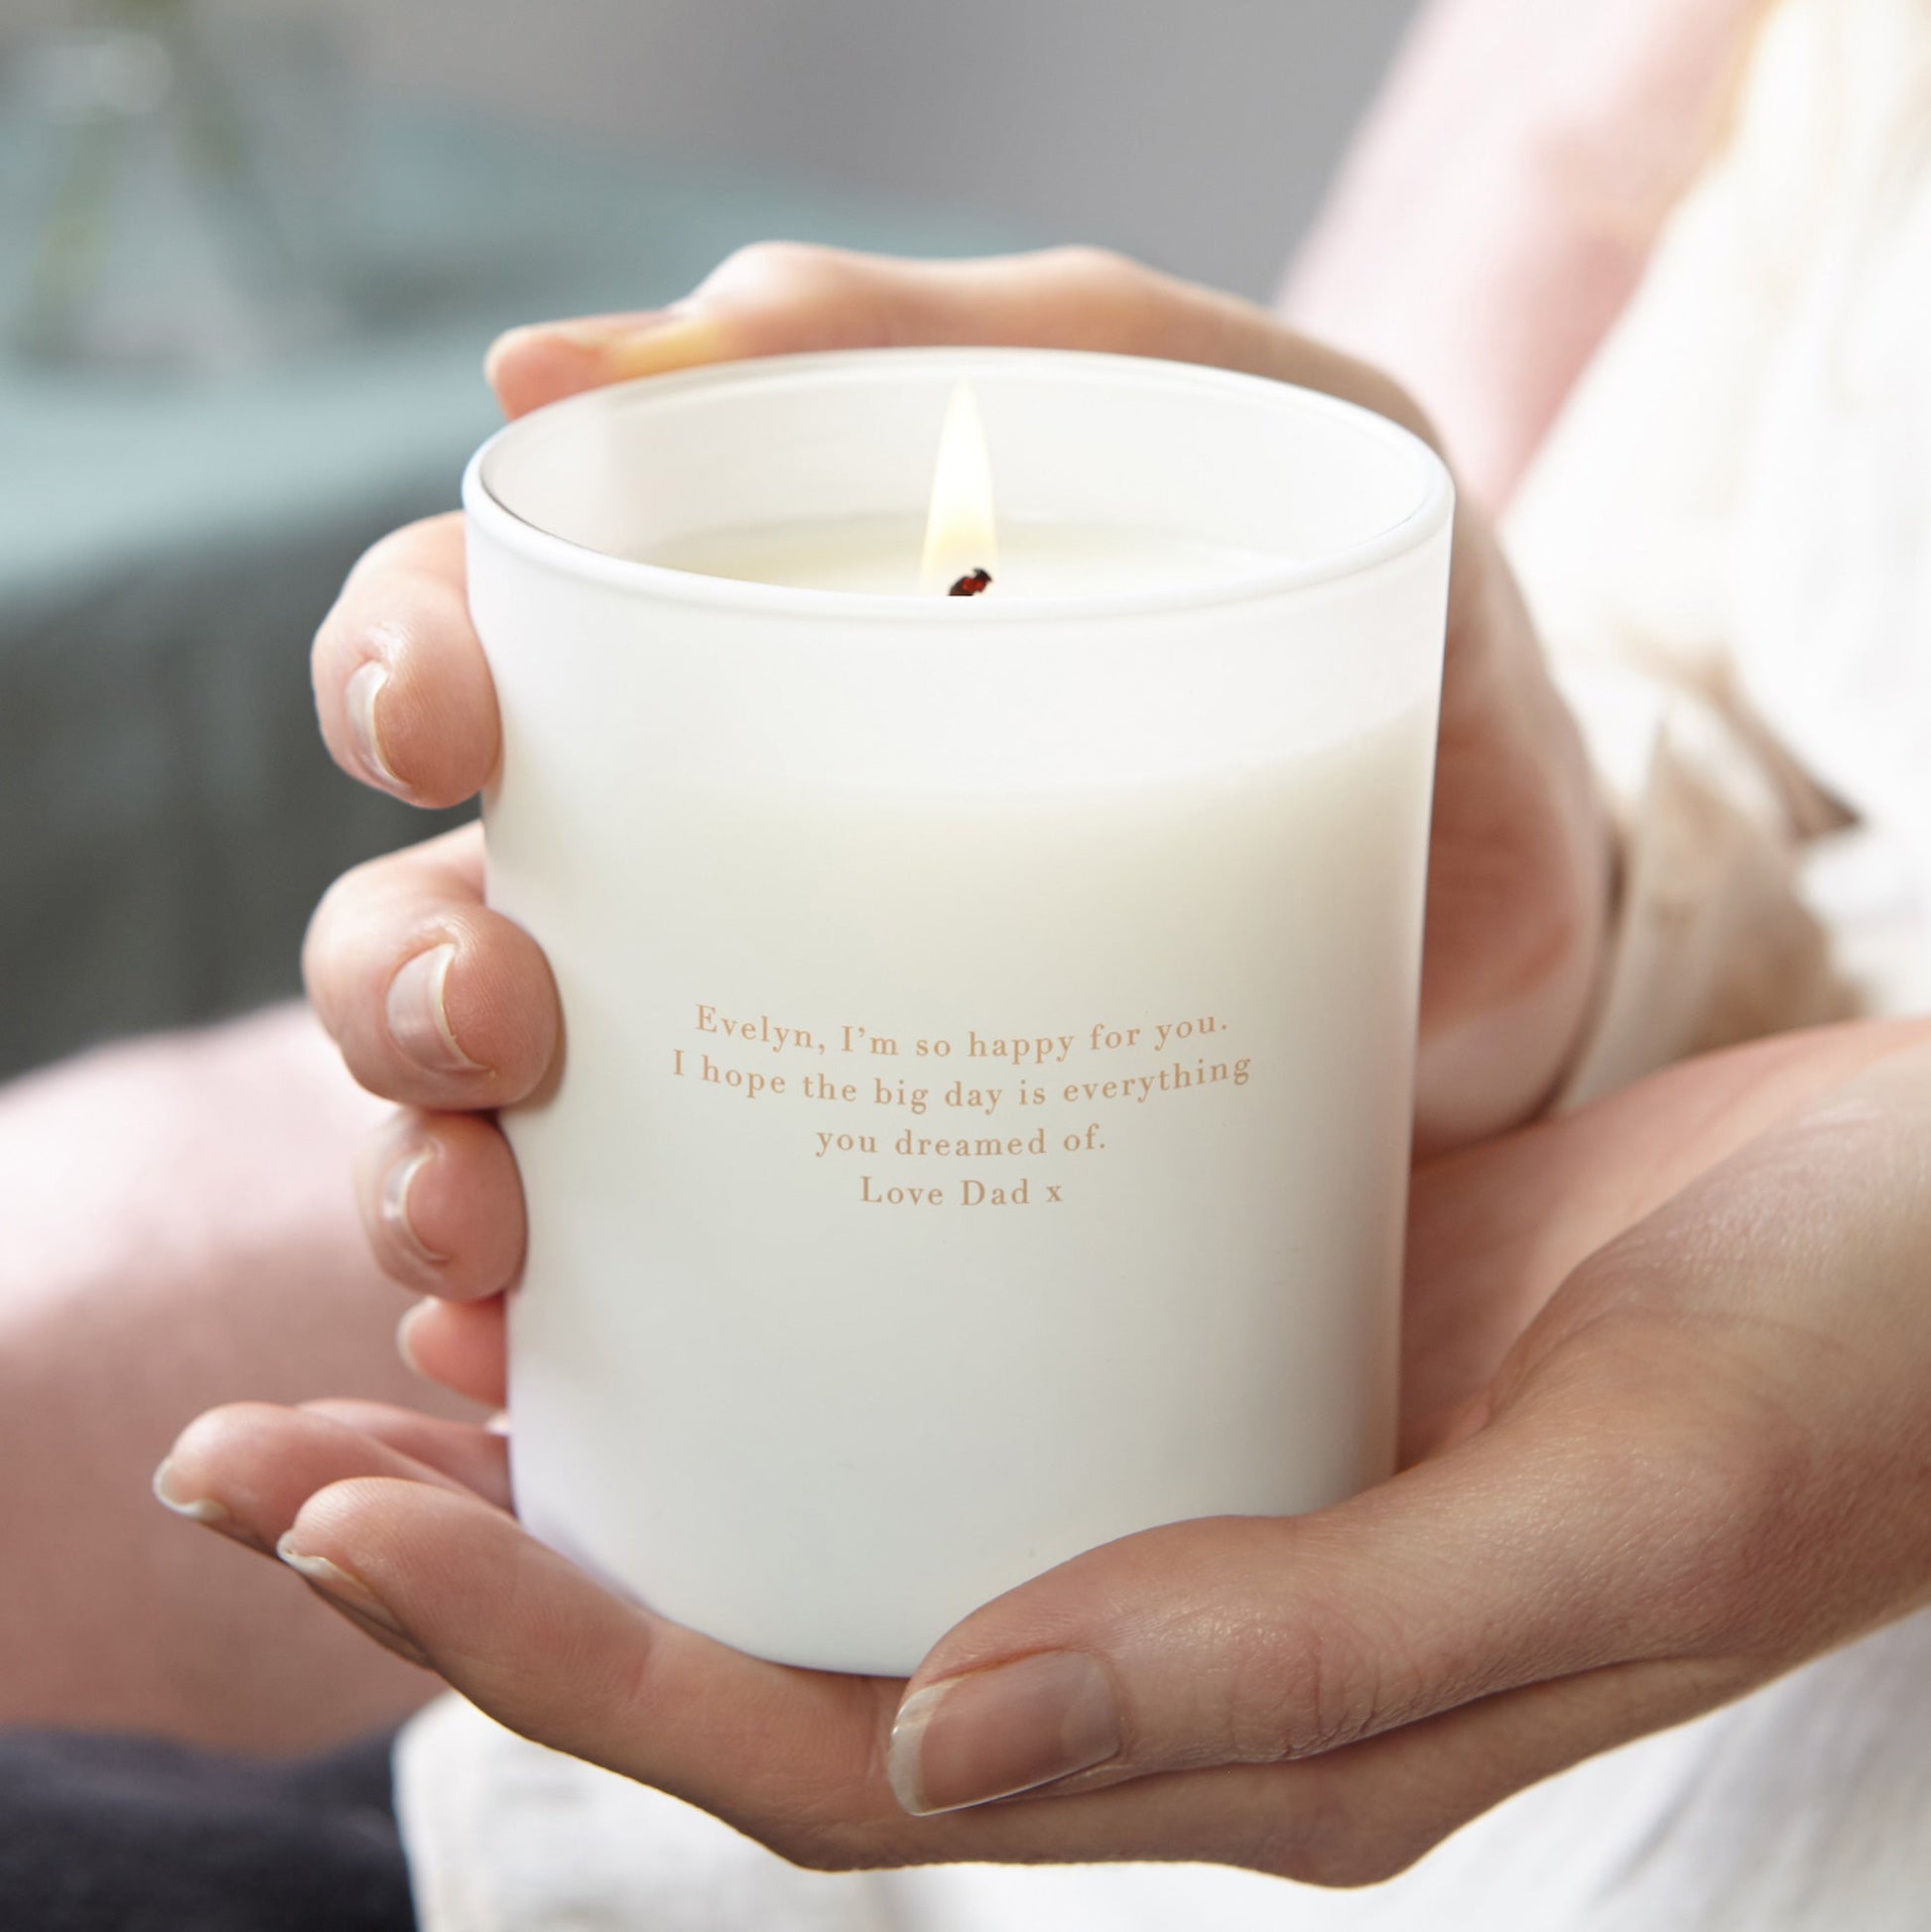 Daughter Wedding Gift White Candle - Kindred Fires